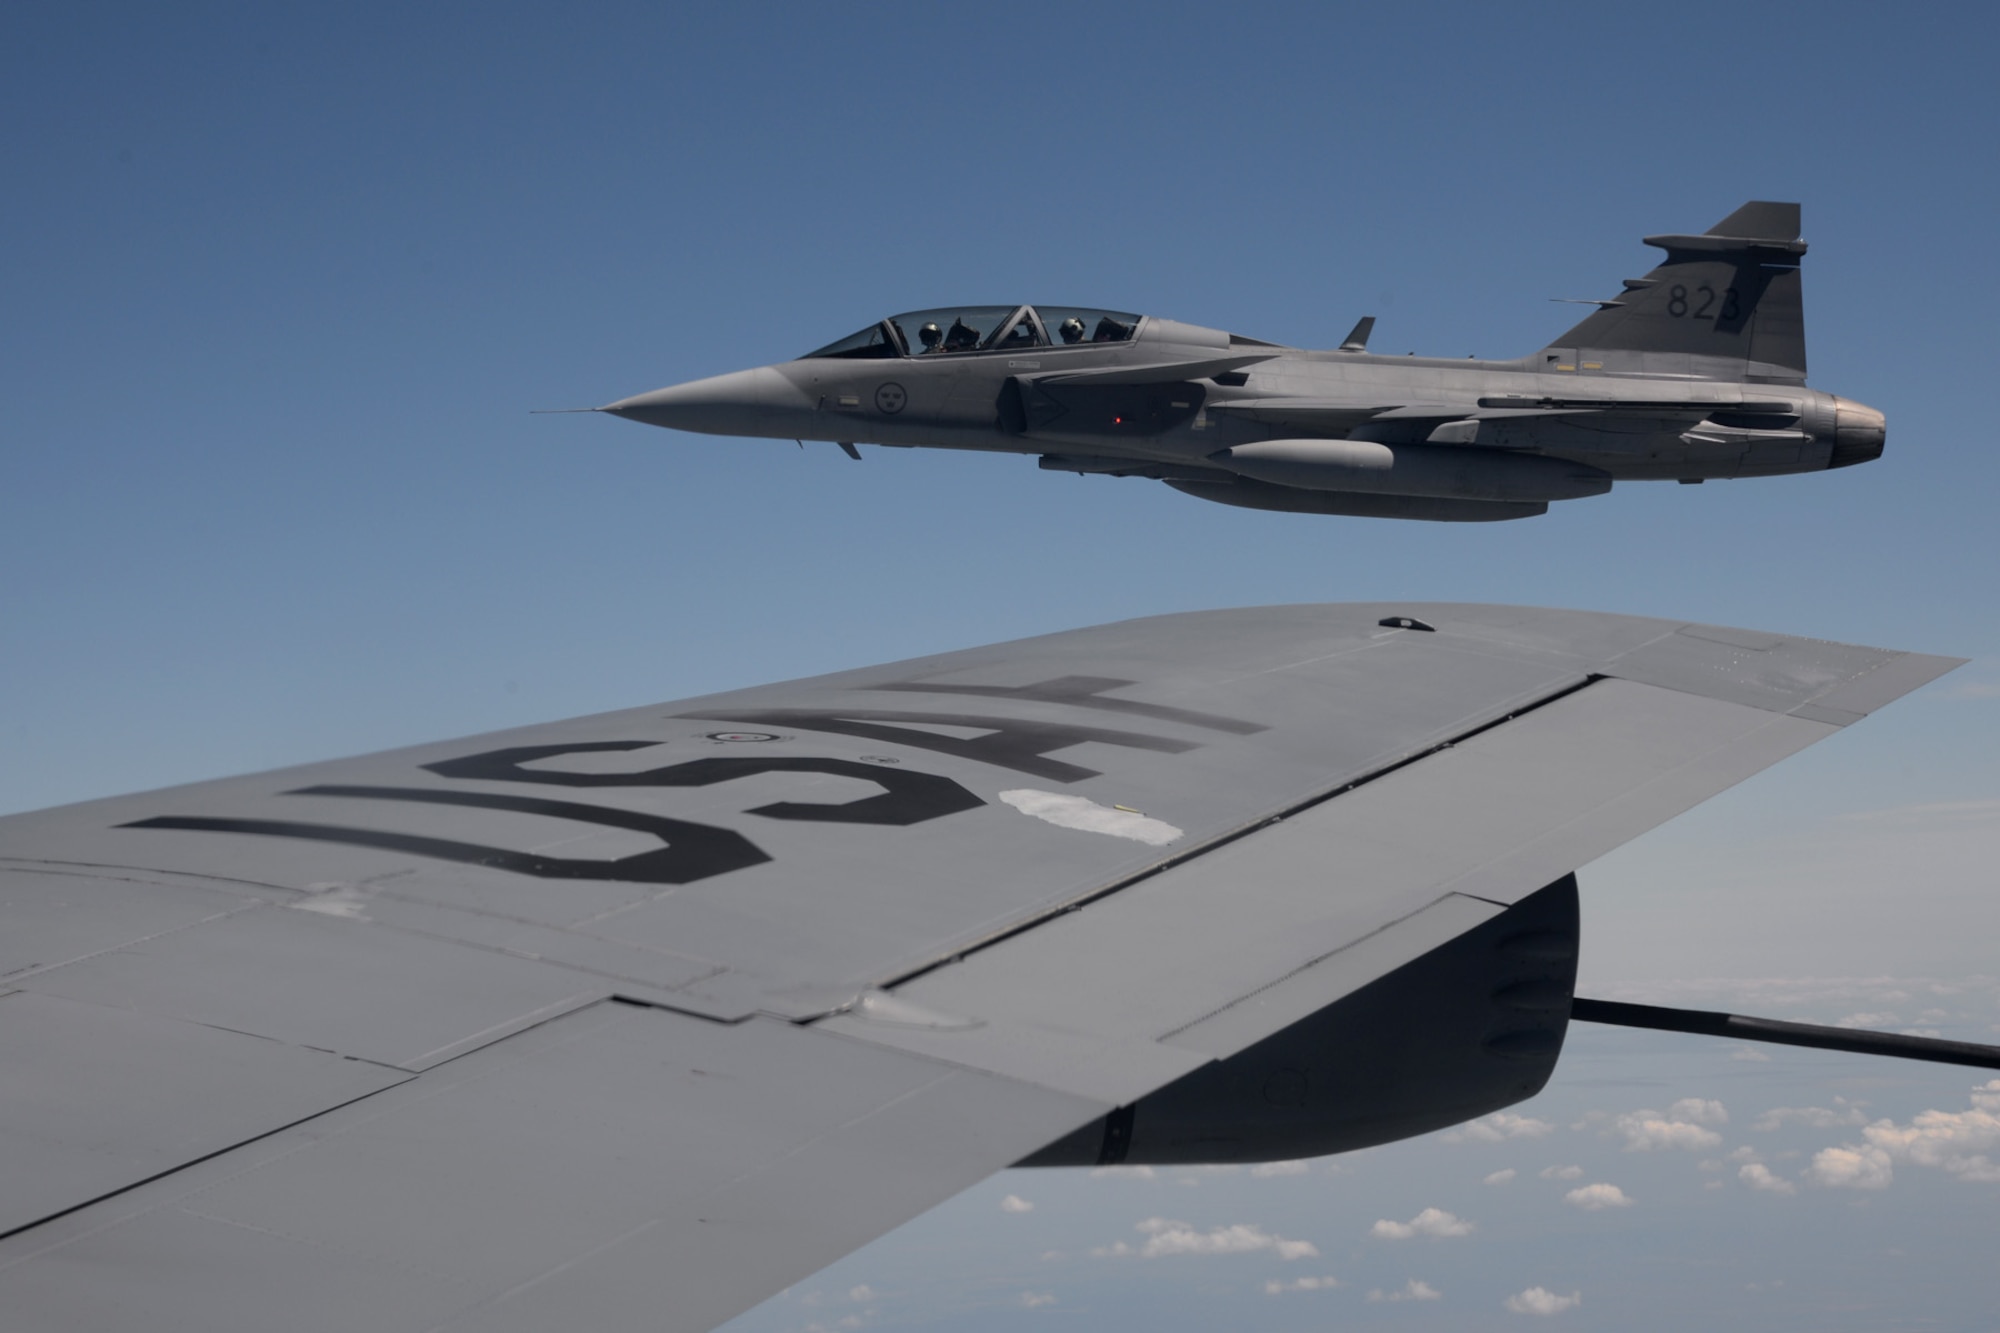 A Swedish air force JAS-39 Gripen flies next to a U.S. Air Force KC-135 Stratotanker June 26, 2015, during air refueling familiarization training over Hungary. Hungarian, U.S. and Swedish air force personnel met for a two-week familiarization period enabling the Hungarian JAS-39 Gripen pilots to successfully perform air refueling for the first time. (U.S. Air Force photo by Senior Airman Kate Thornton/Released)